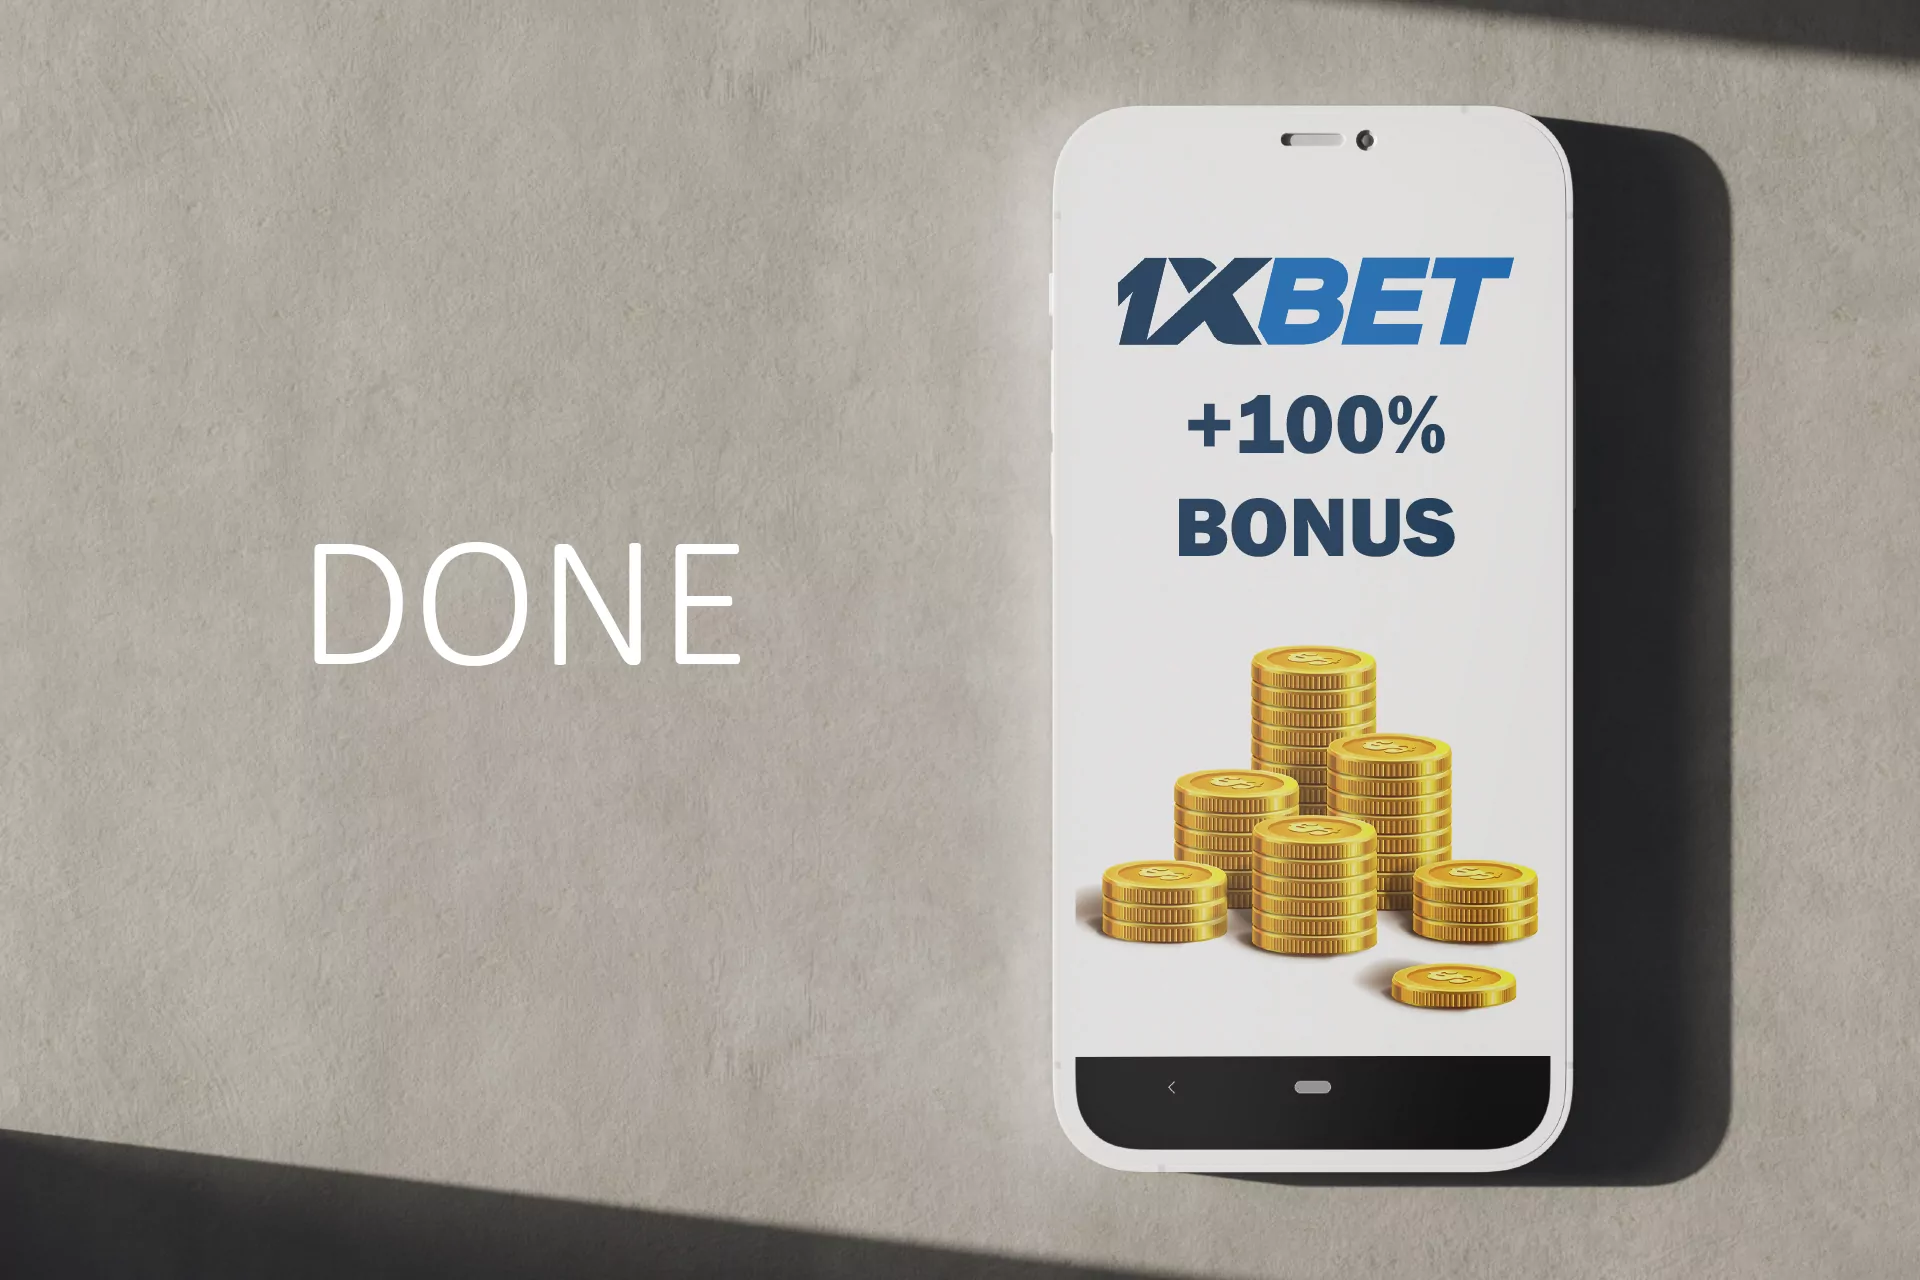 Get the bonus and enjoy placing bets on cricket.